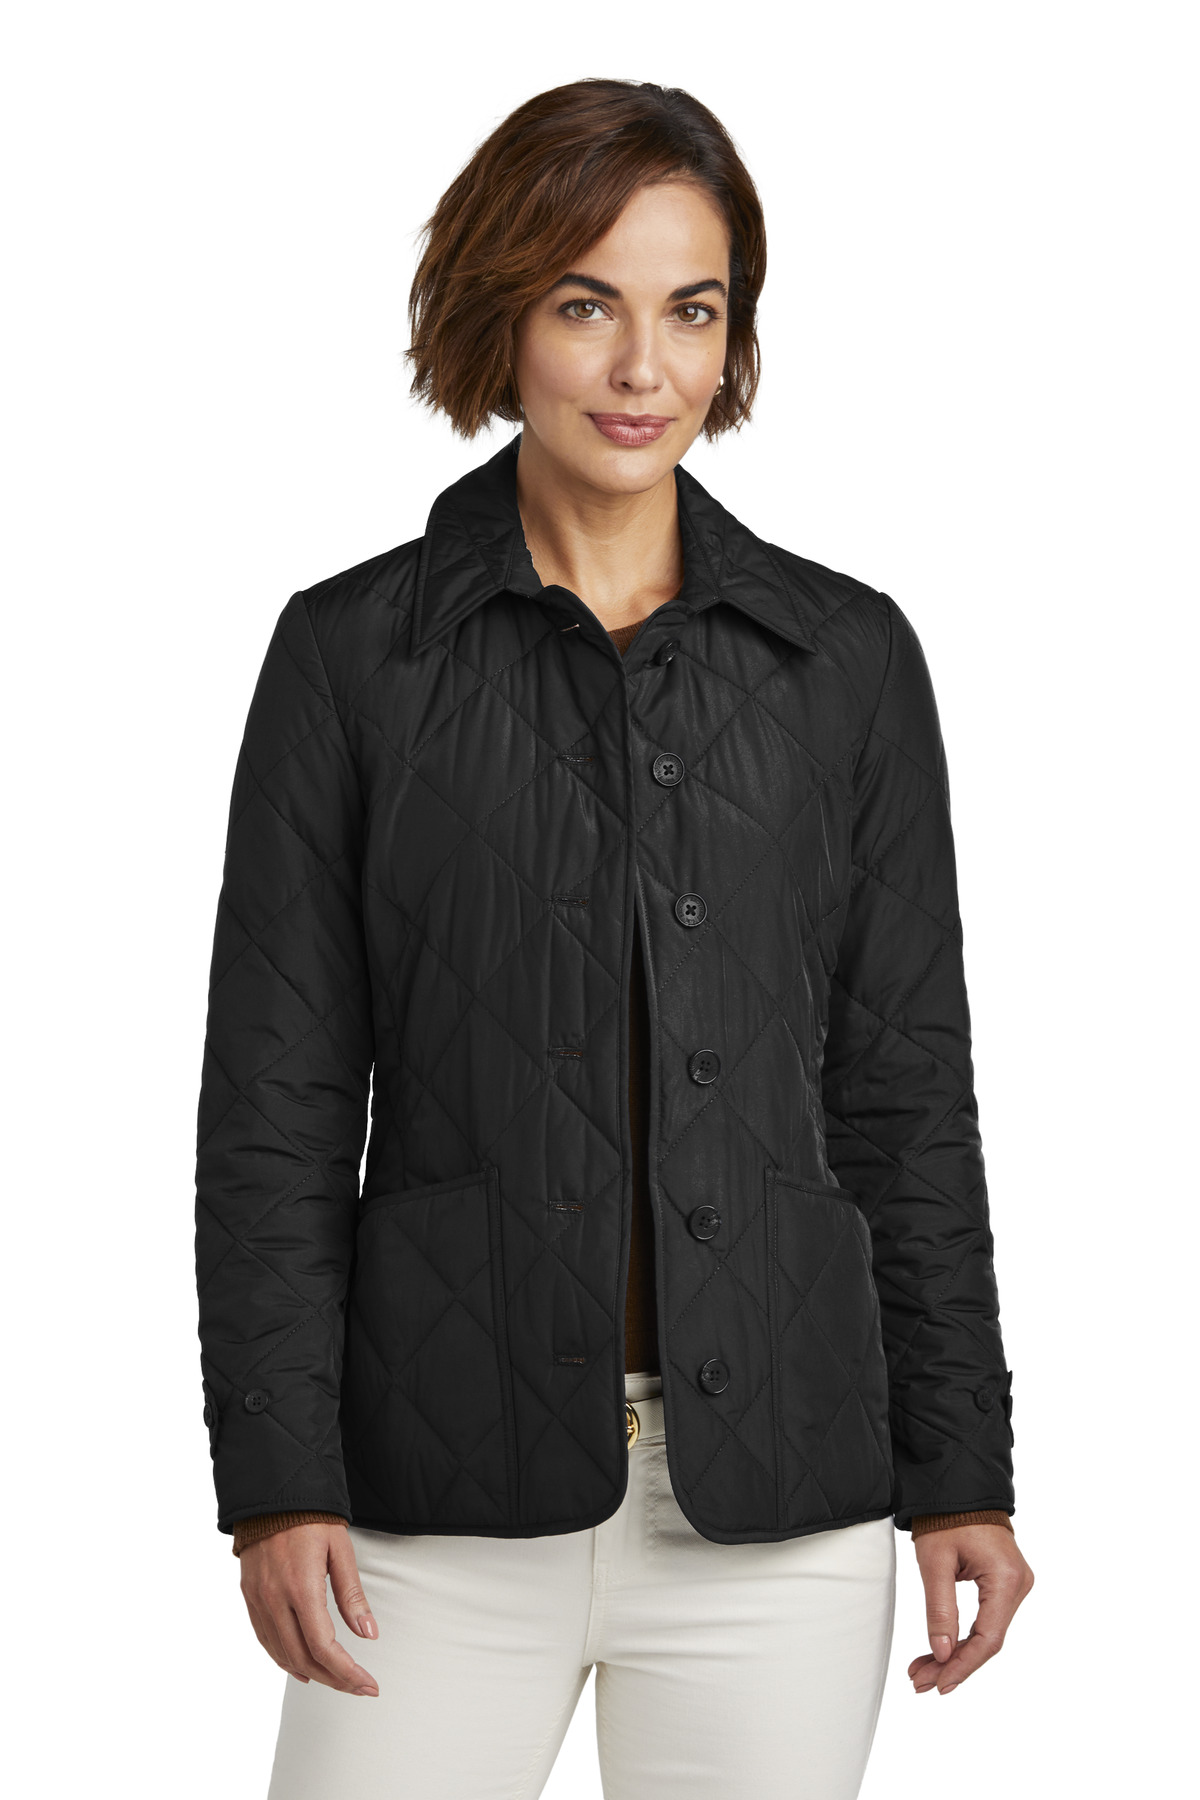 Brooks Brothers Women's Quilted Jacket BB18601